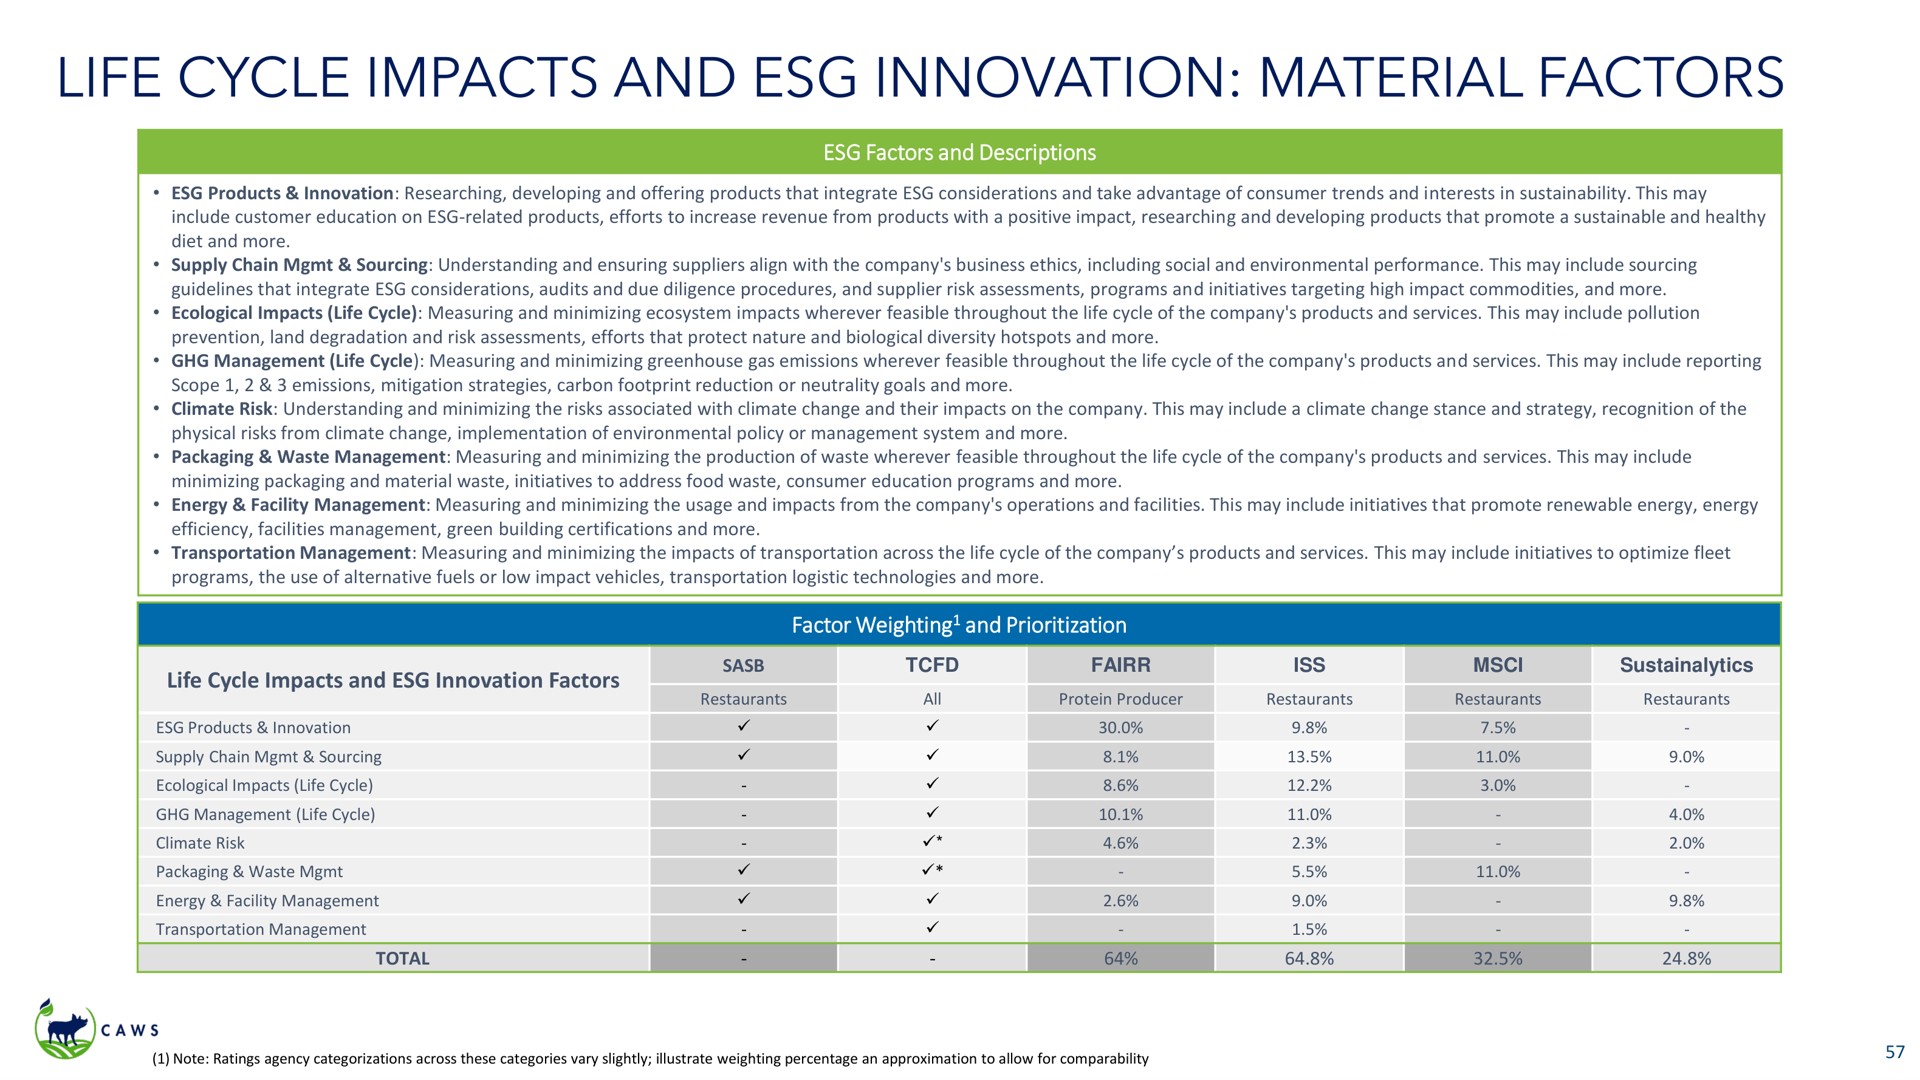 life cycle impacts and innovation material factors | Icahn Enterprises